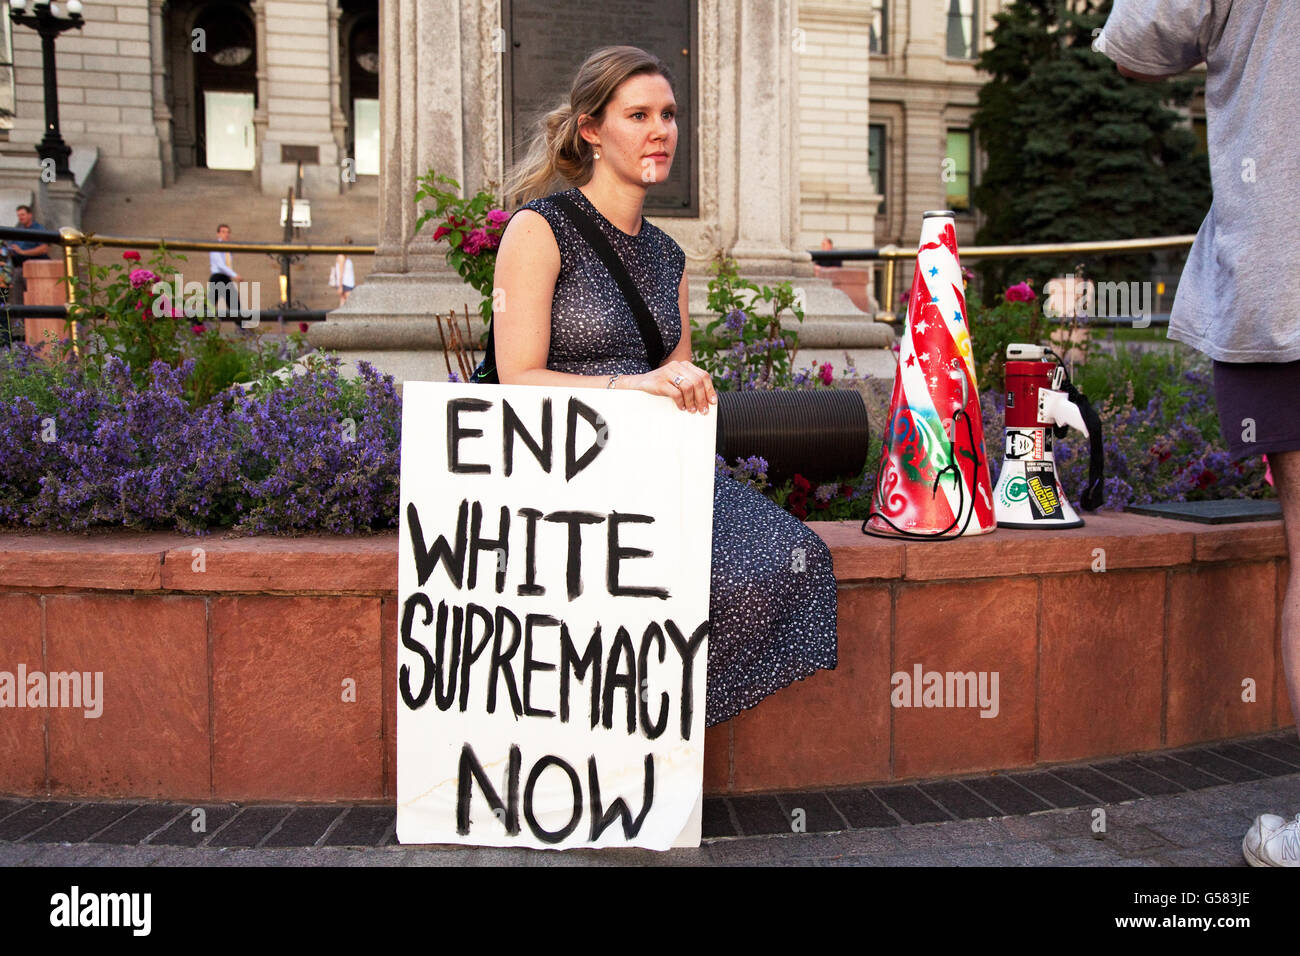 Denver, Colorado, USA. 23rd June 2015. Demonstrator with sign waits for beginning of rally to protest state-sponsored racism, such as the flying of the Confederate flag at the South Carolina State Capitol and the shooting of unarmed black men by white police officers. © Stuart Sipkin/Alamy Live News. Stock Photo